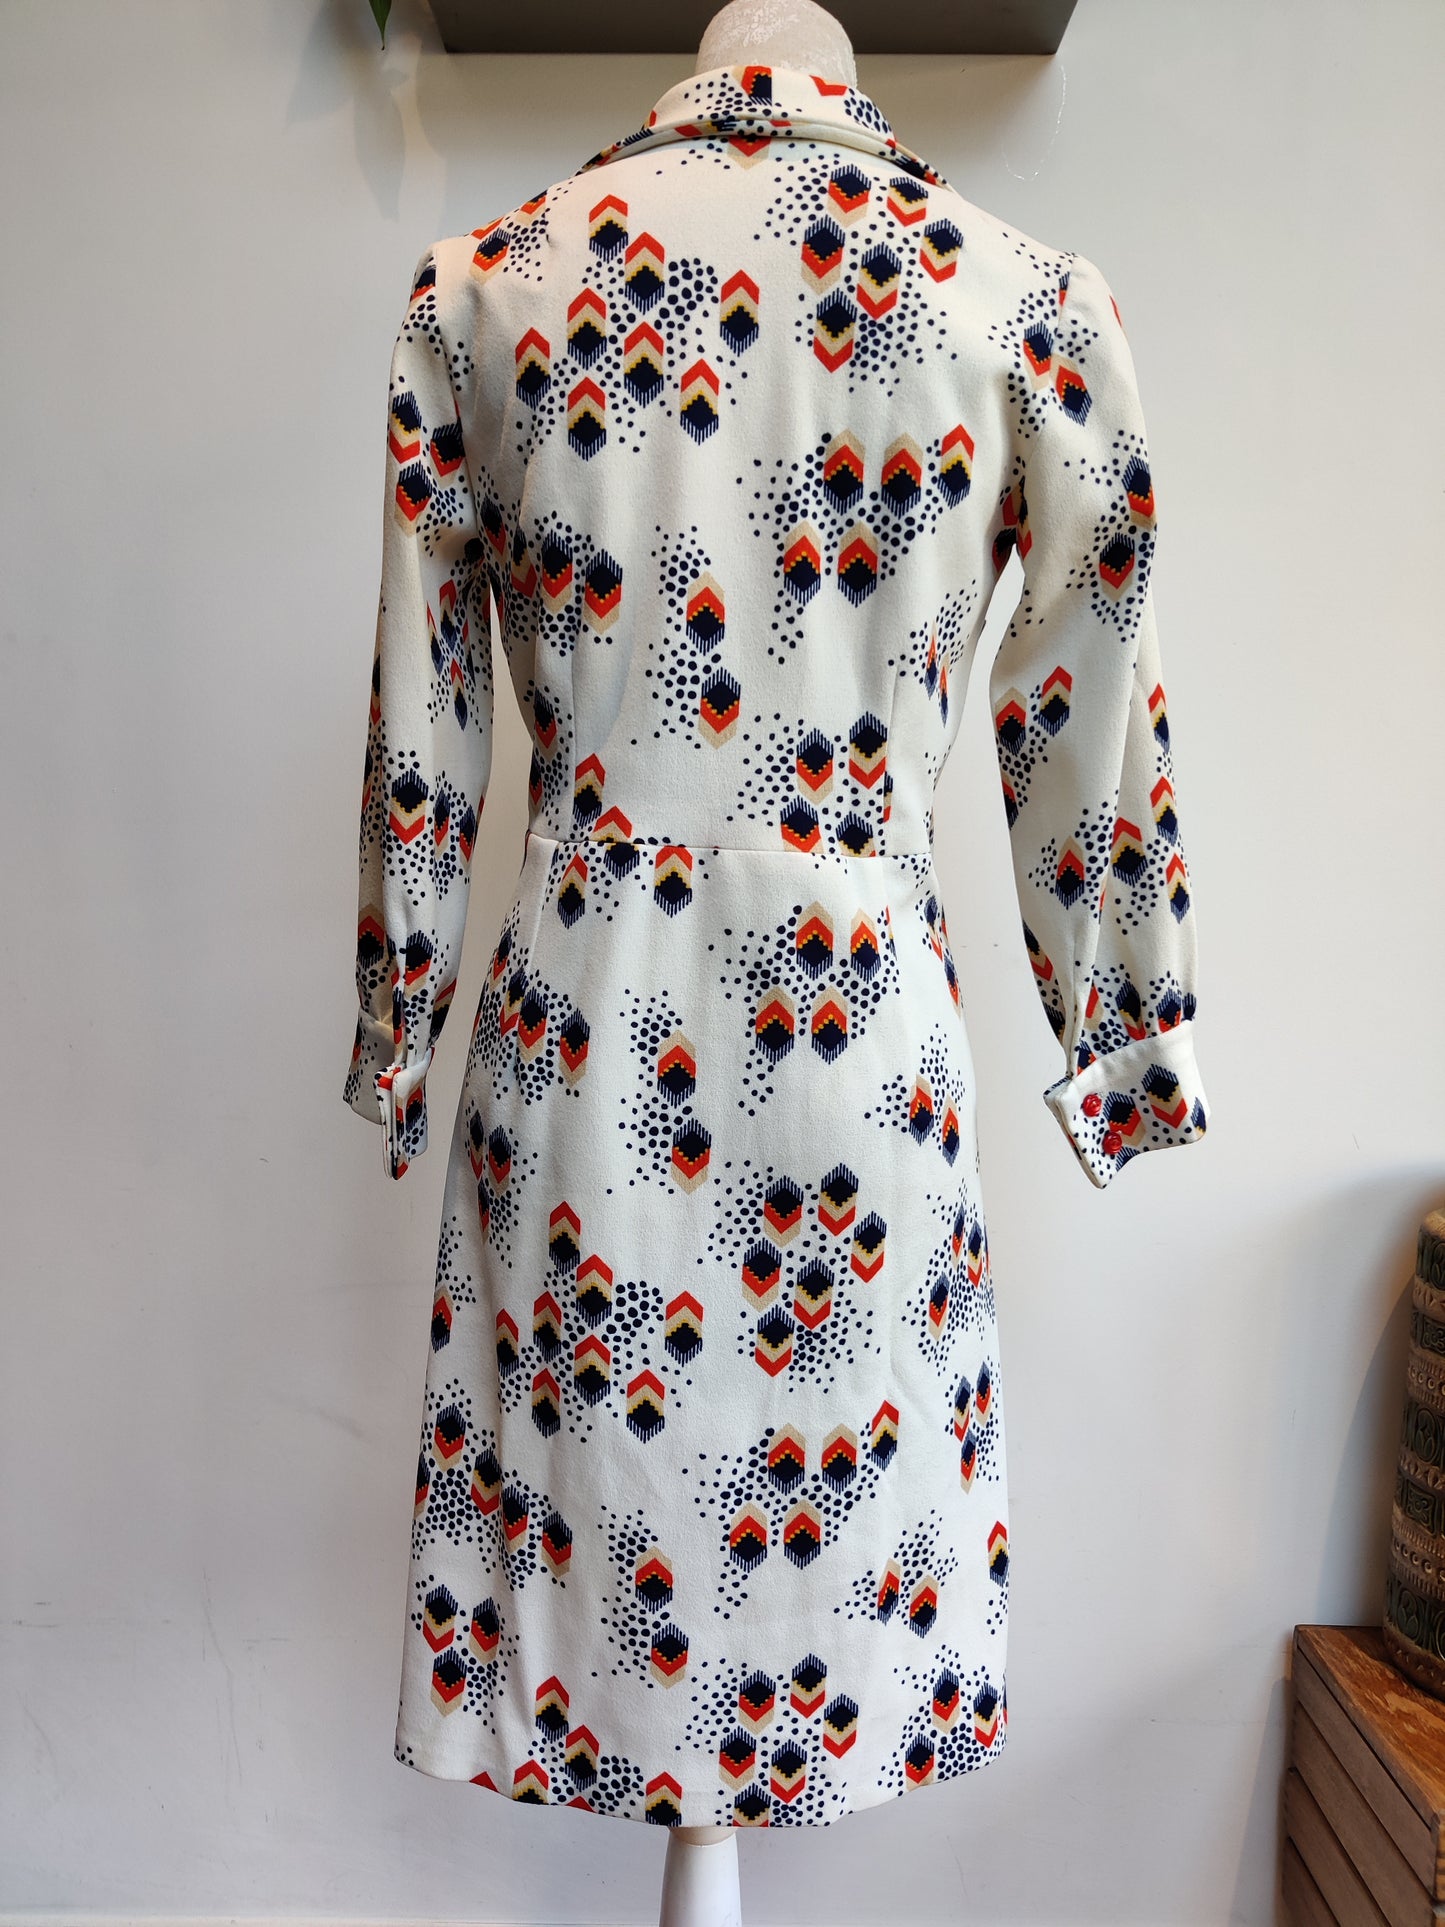 Incredible 60s midi dress with psychedelic print. Size 12.